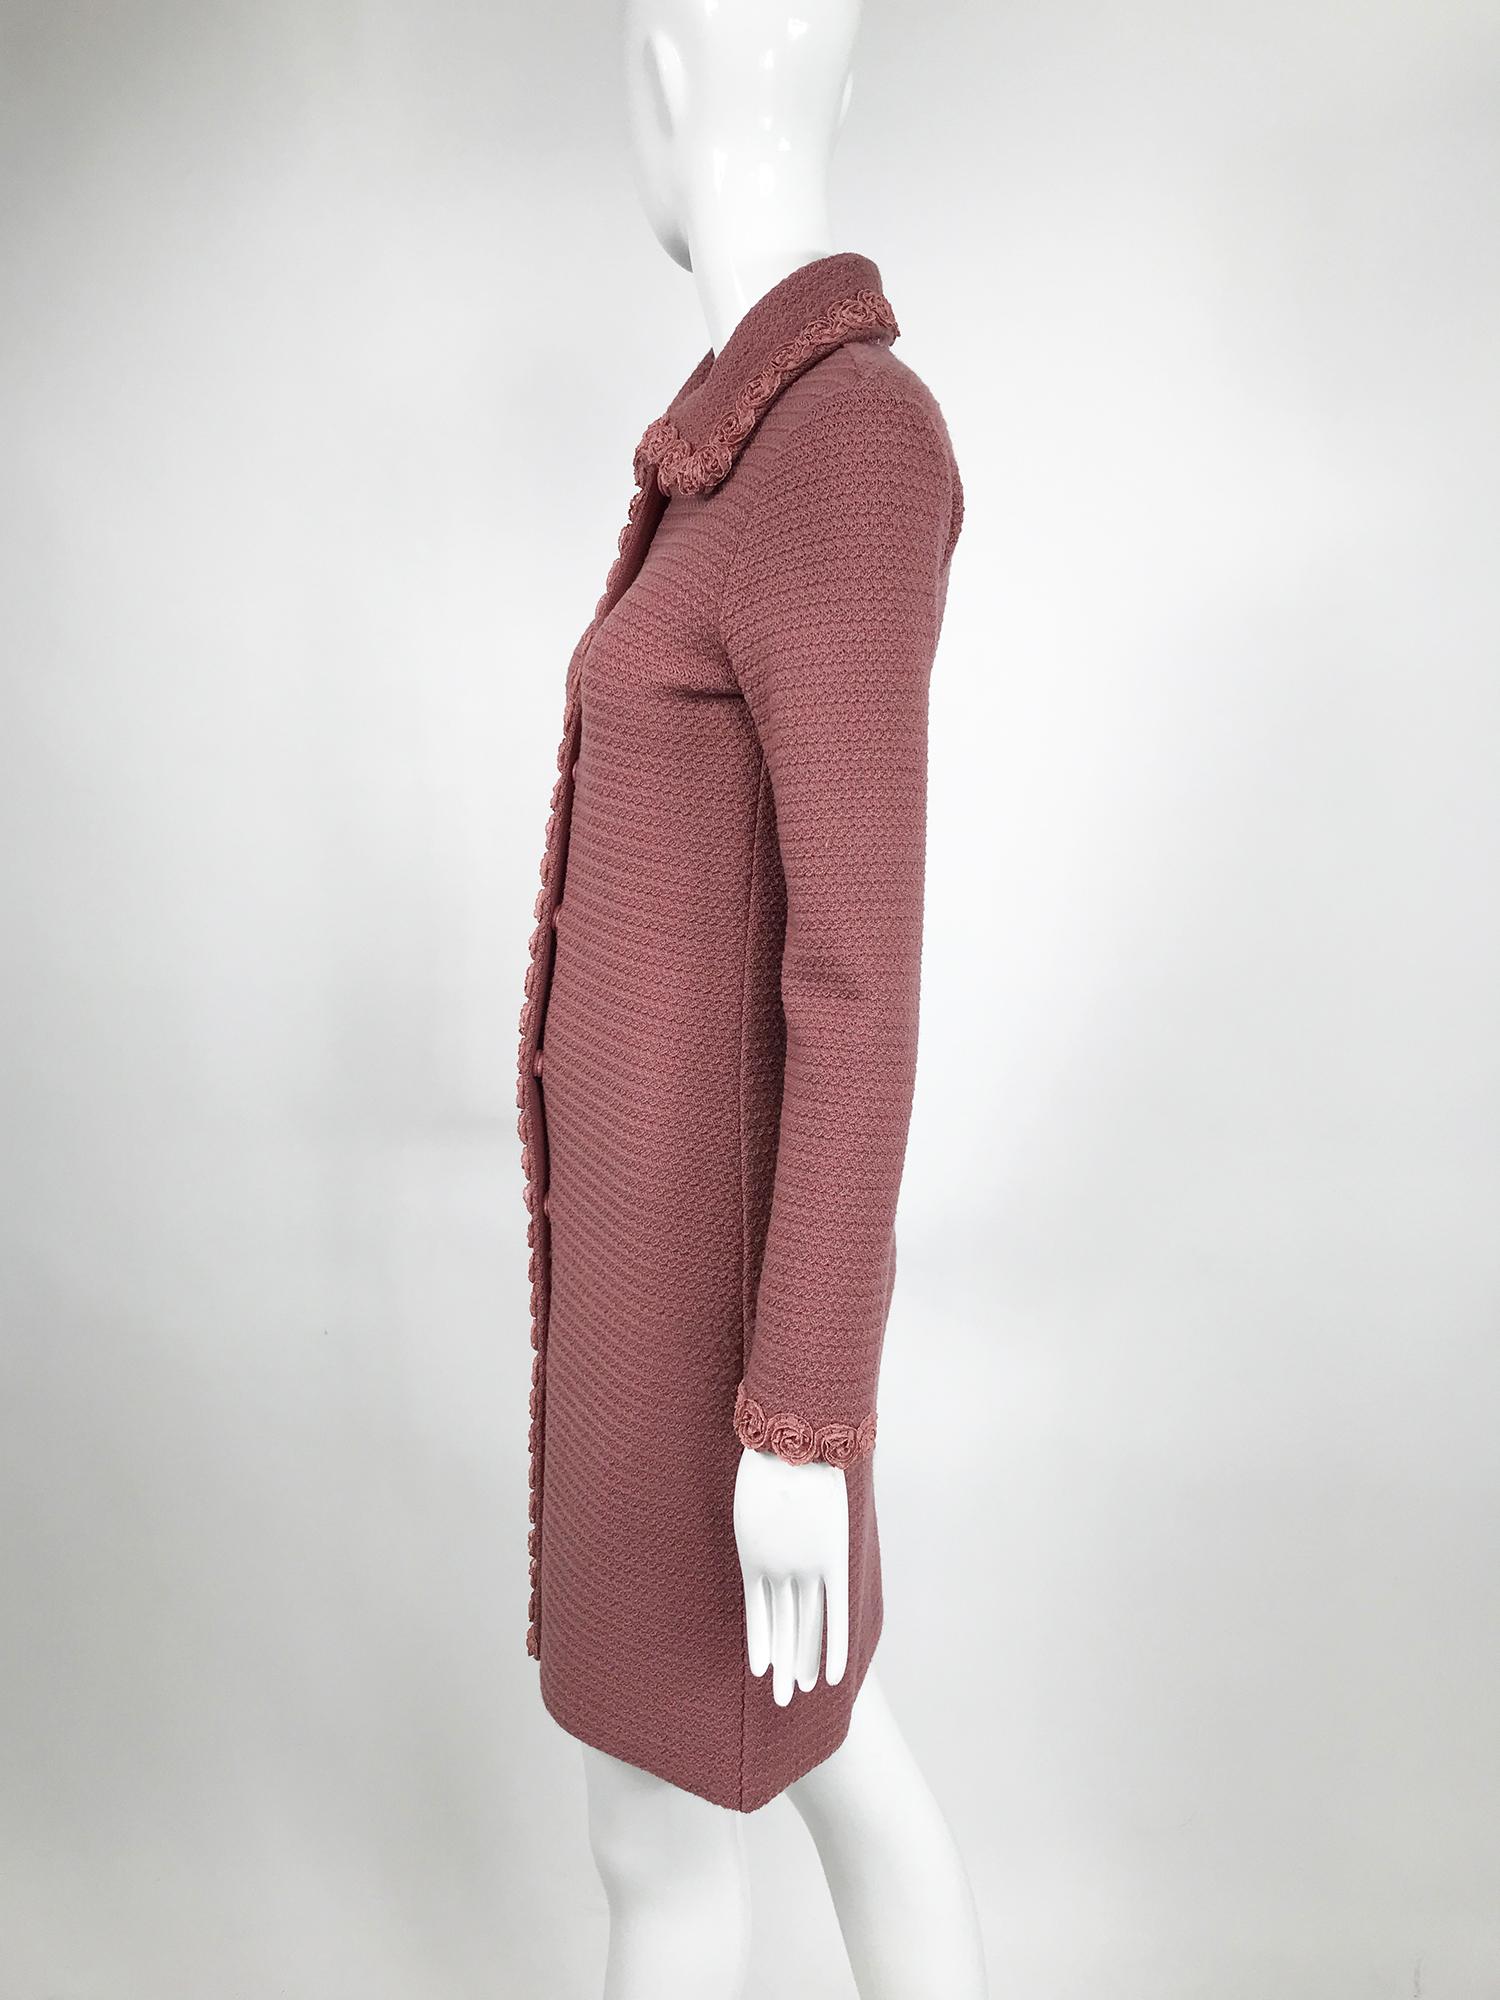 Moschino Pink Wool Knit Coat with Rosette Lace Trims 3